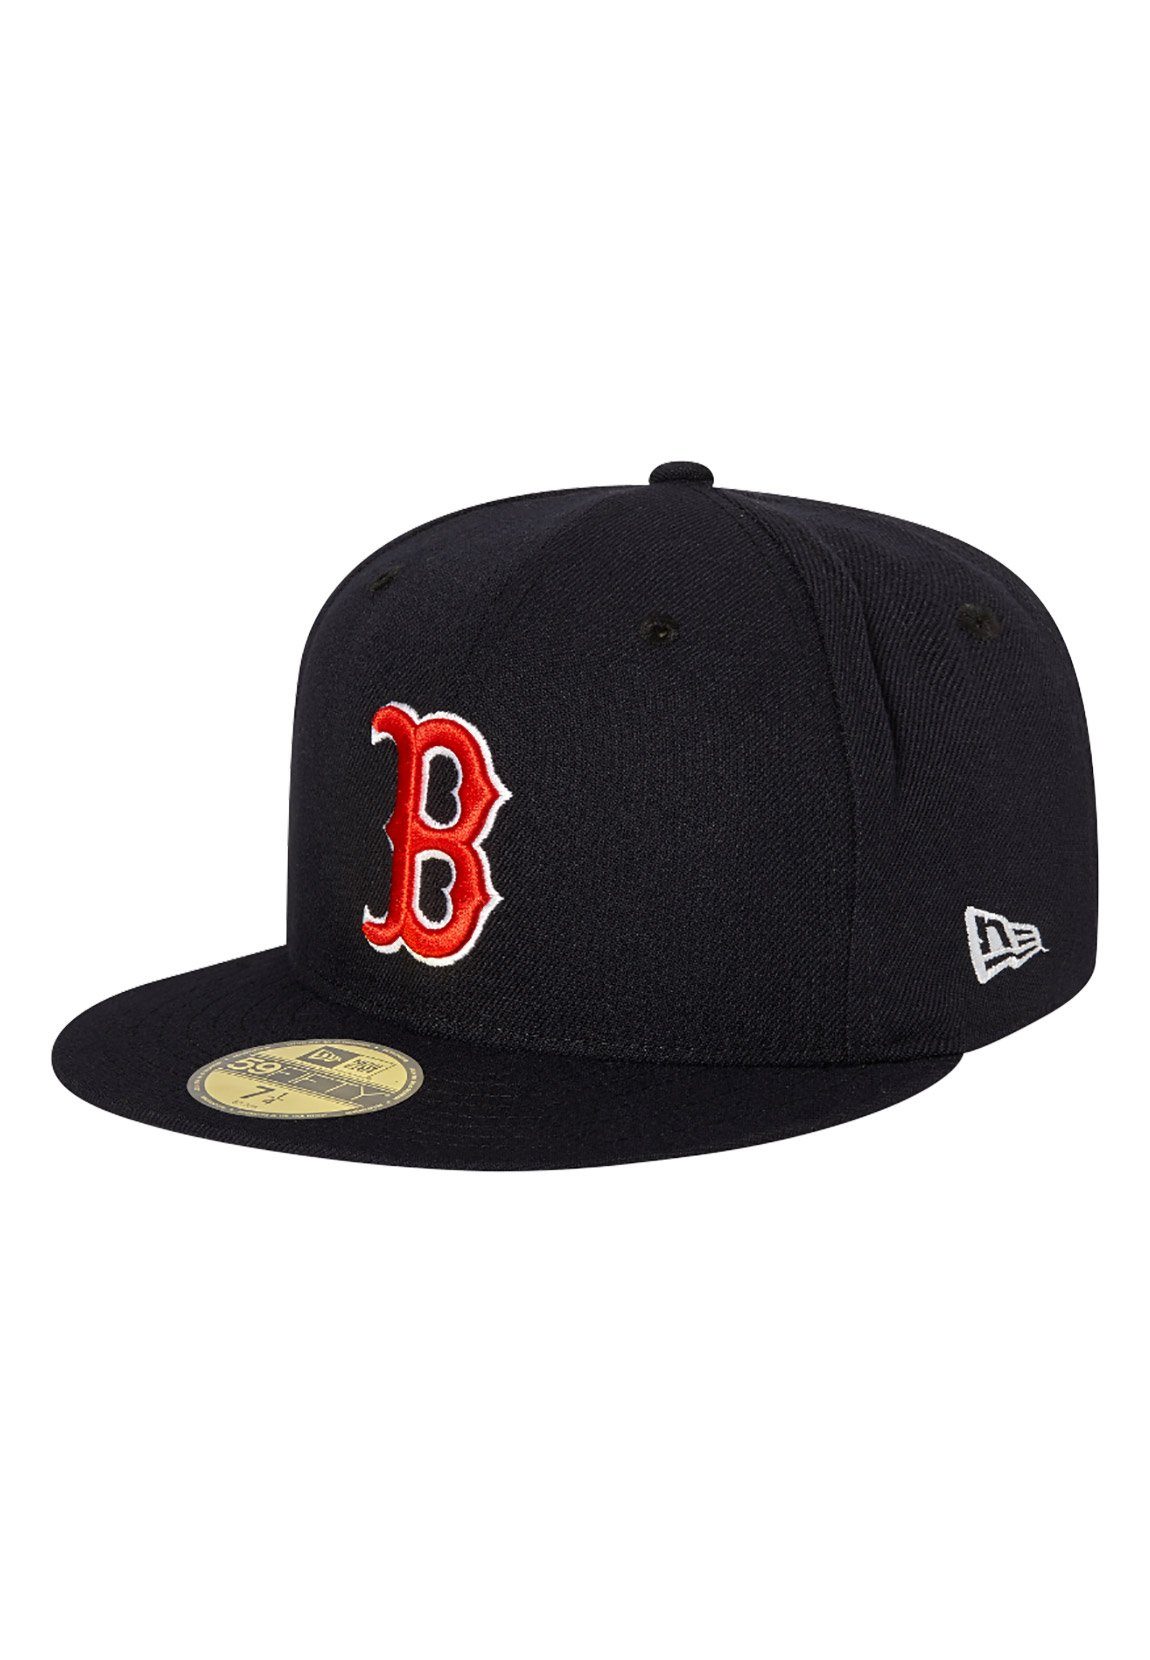 New Era Fitted Cap New Era Authentics Fitted Cap 59Fifty BOSTON RED SOX Dunkelblau Rot